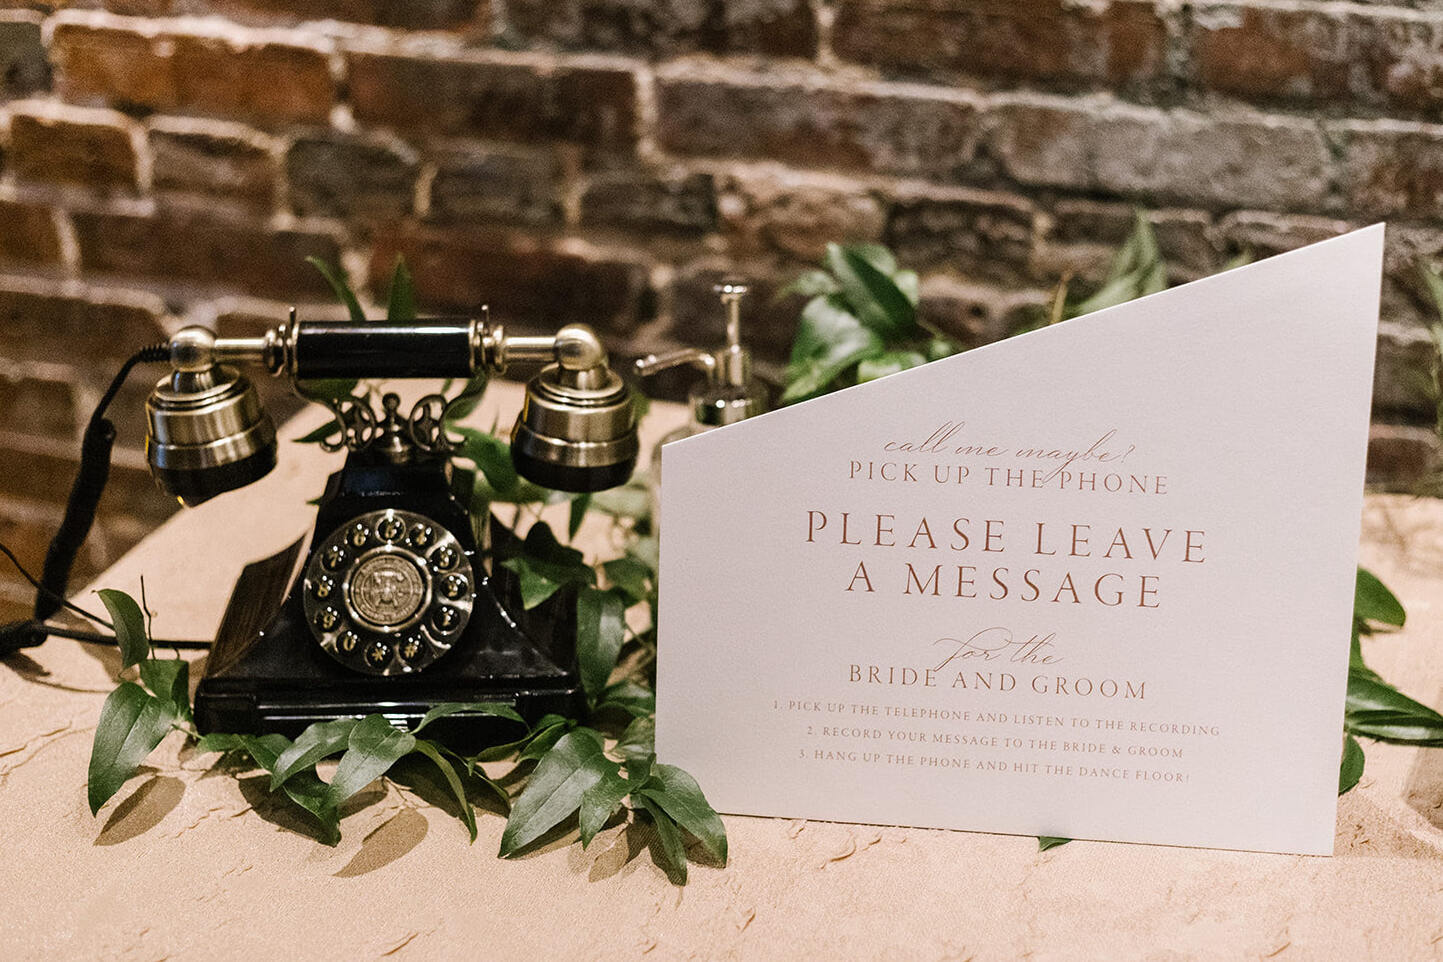 A vintage phone was used for guests to record audio messages at an industrial wedding in Baltimore.